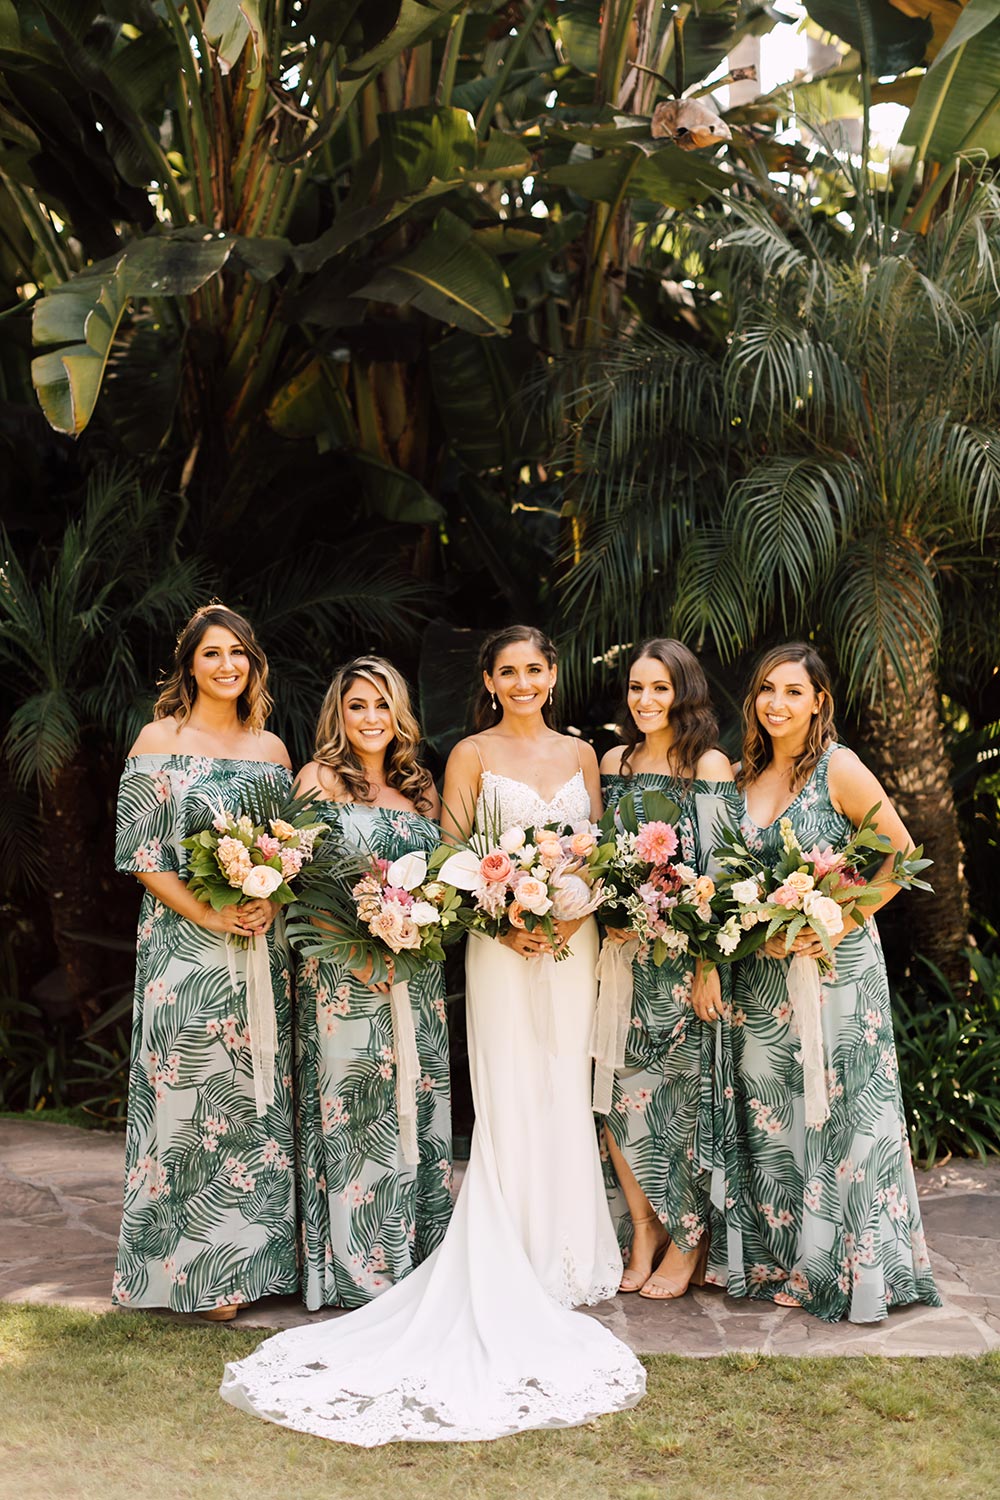 Off the shoulder long bridesmaid dresses with palm tree leaves patterns